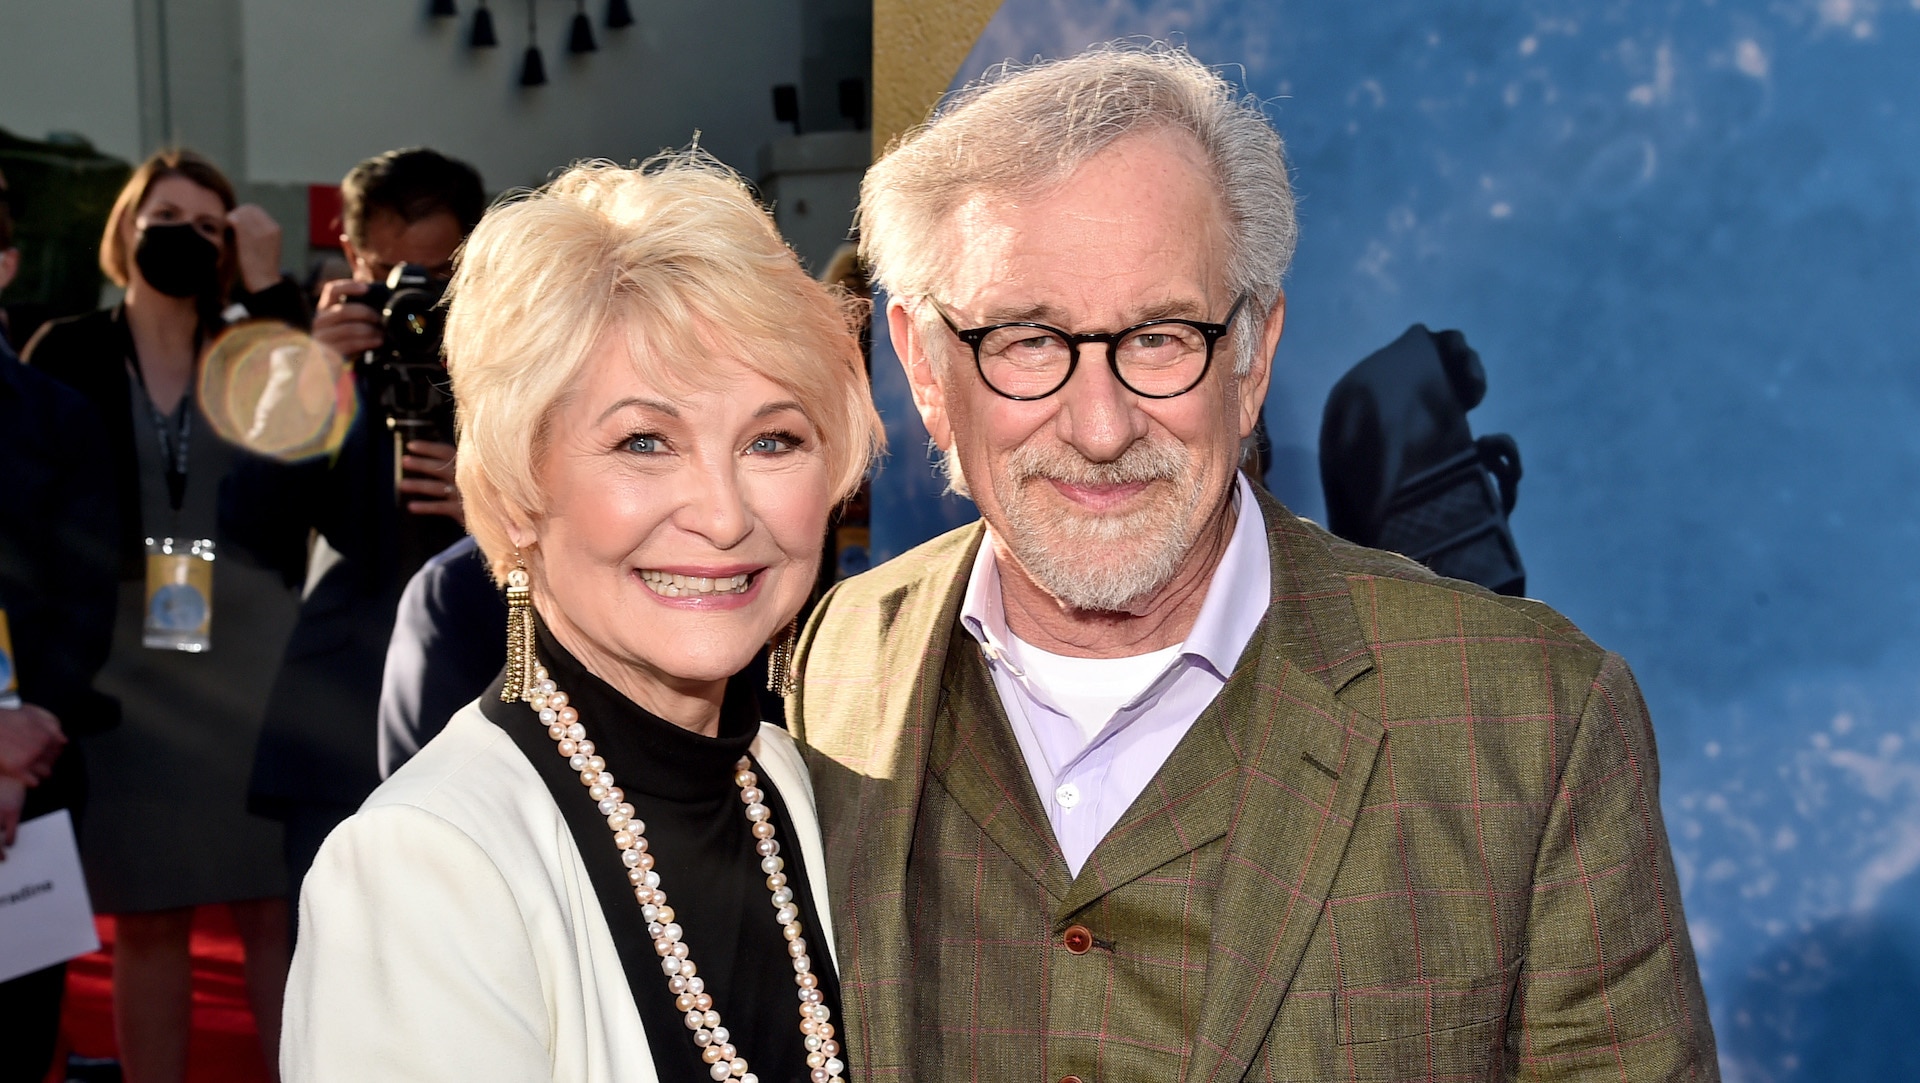 (L-R) Dee Wallace and Steven Spielberg